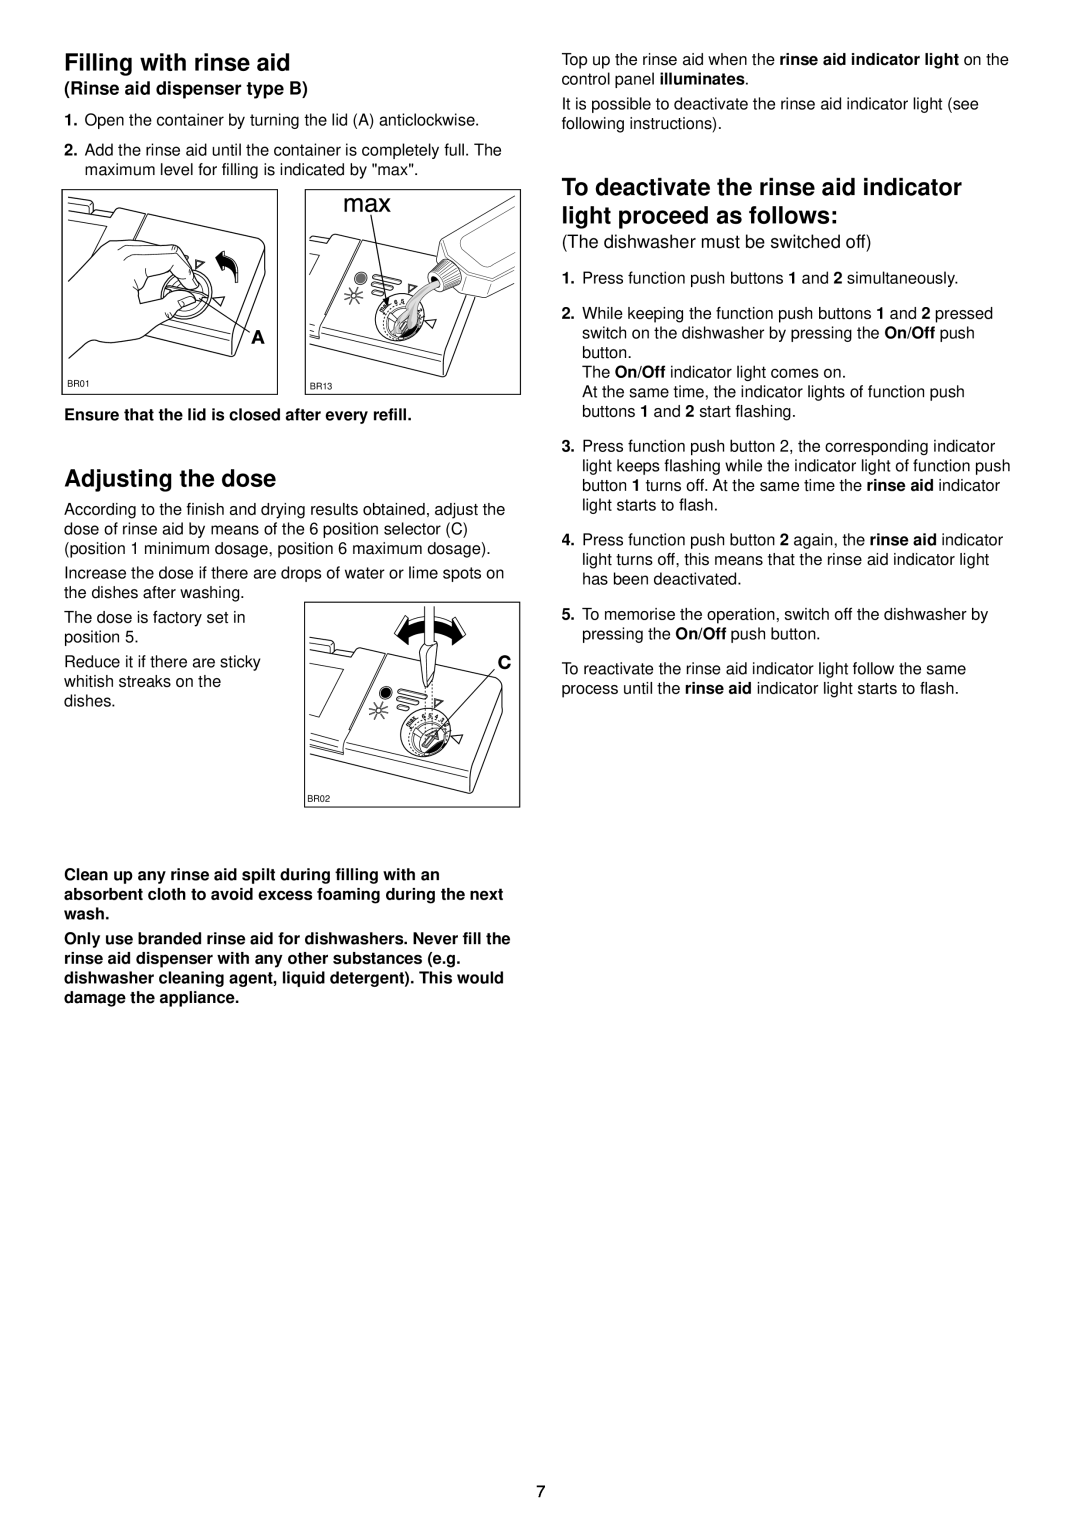 Zanussi DE 6554 manual To deactivate the rinse aid indicator light proceed as follows, Rinse aid dispenser type B 